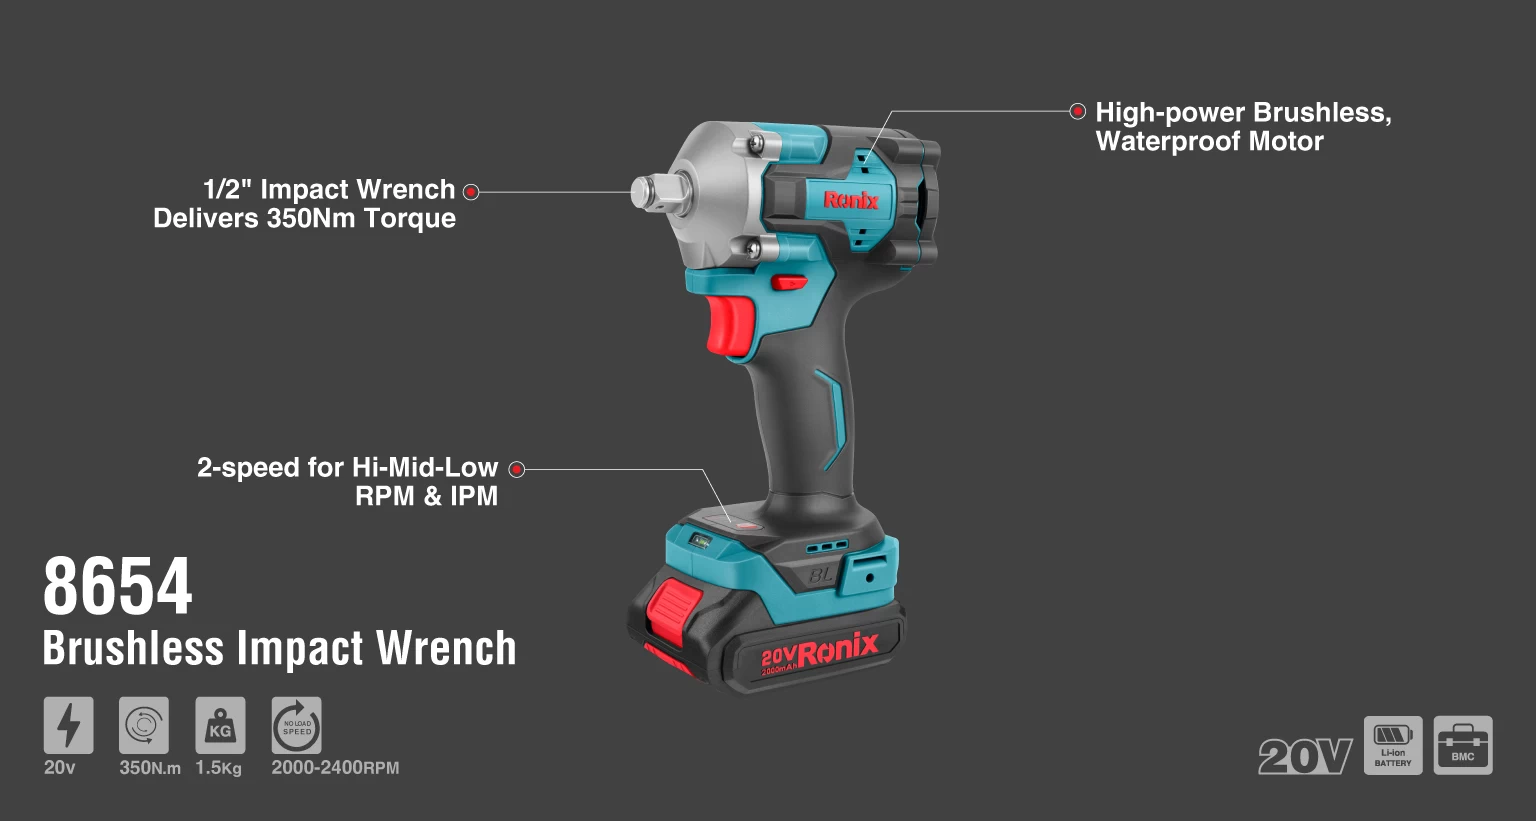 20V Brushless impact wrench 1/2 inch-350Nm_details